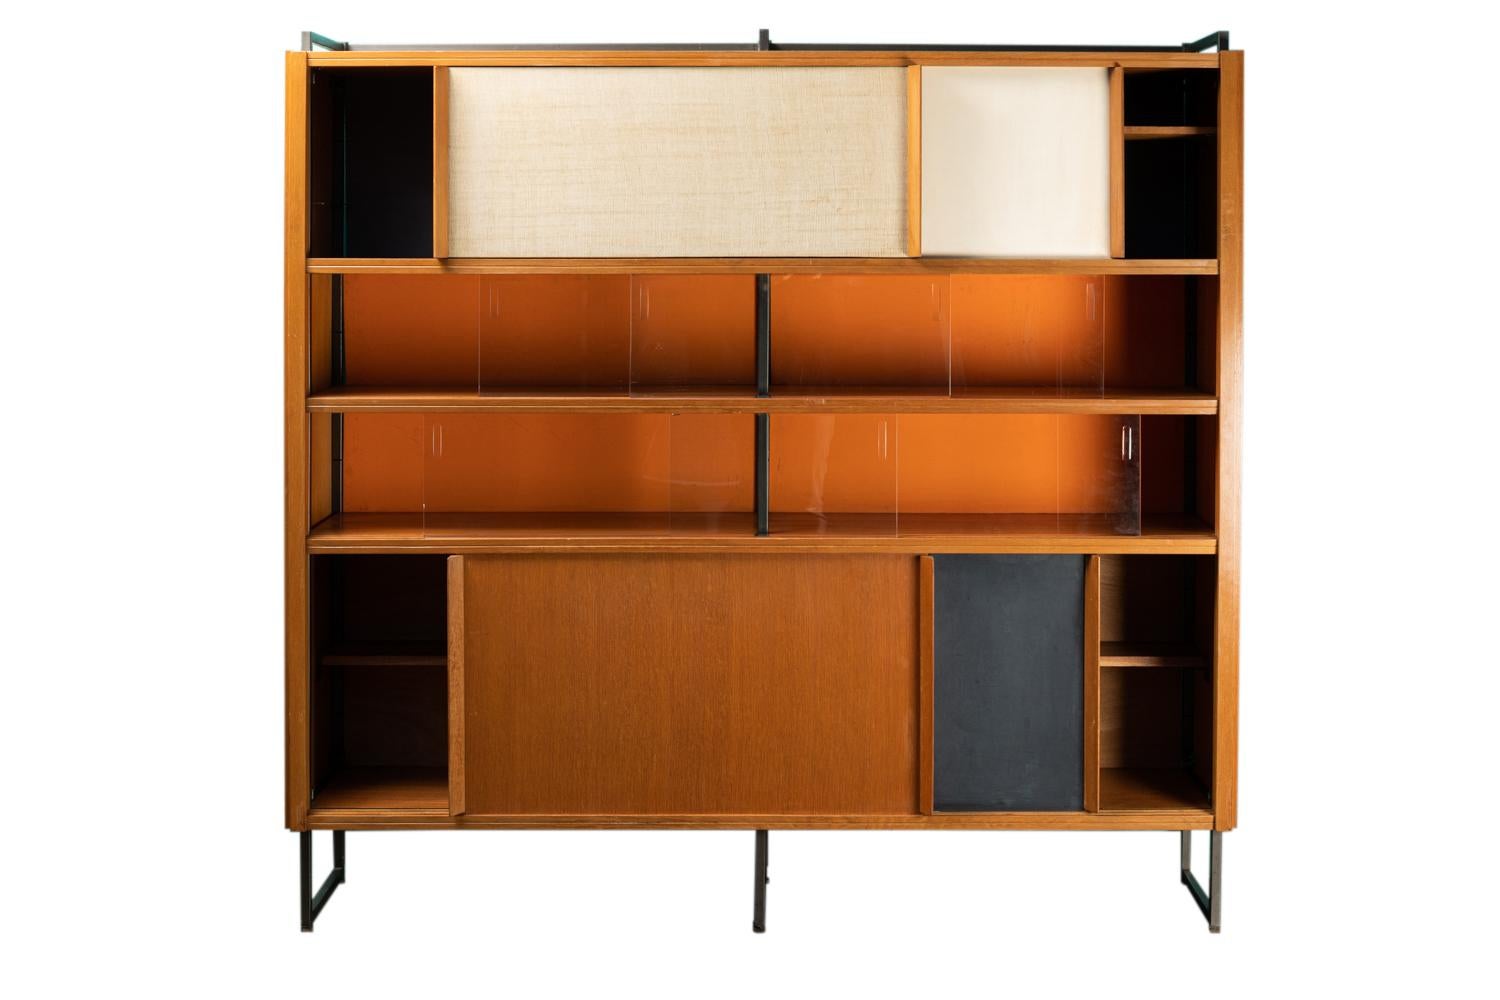 Georges Frydman, attributed to. 

Bookcase in blond oak and black lacquered metal. It opens with colored sliding panels, in veneer and slate. Base and frame in black lacquered metal. The back of the bookcase is made of wood painted in orange,